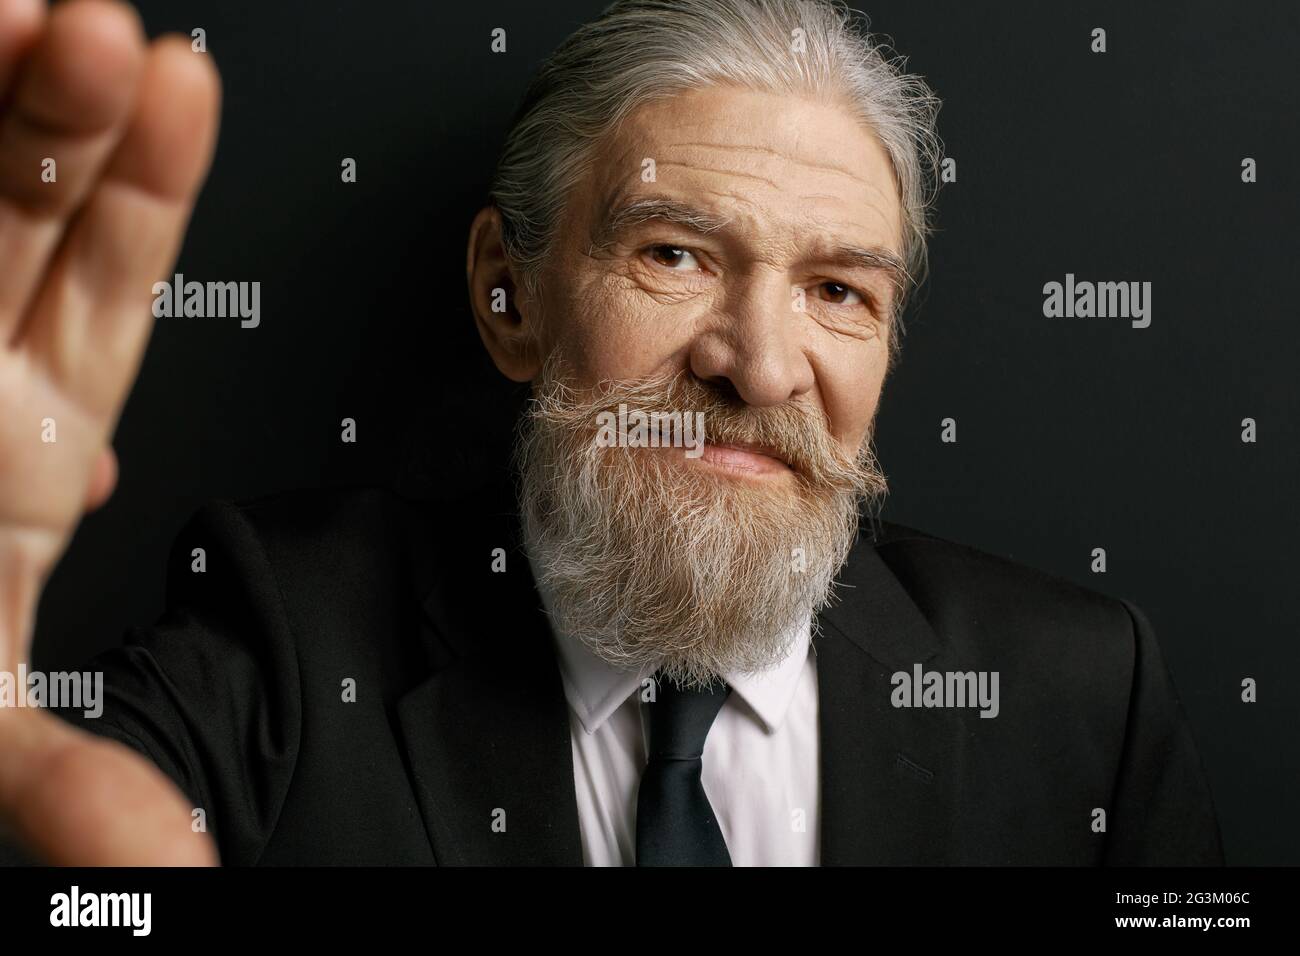 Very old stylish man with kind face. Stock Photo